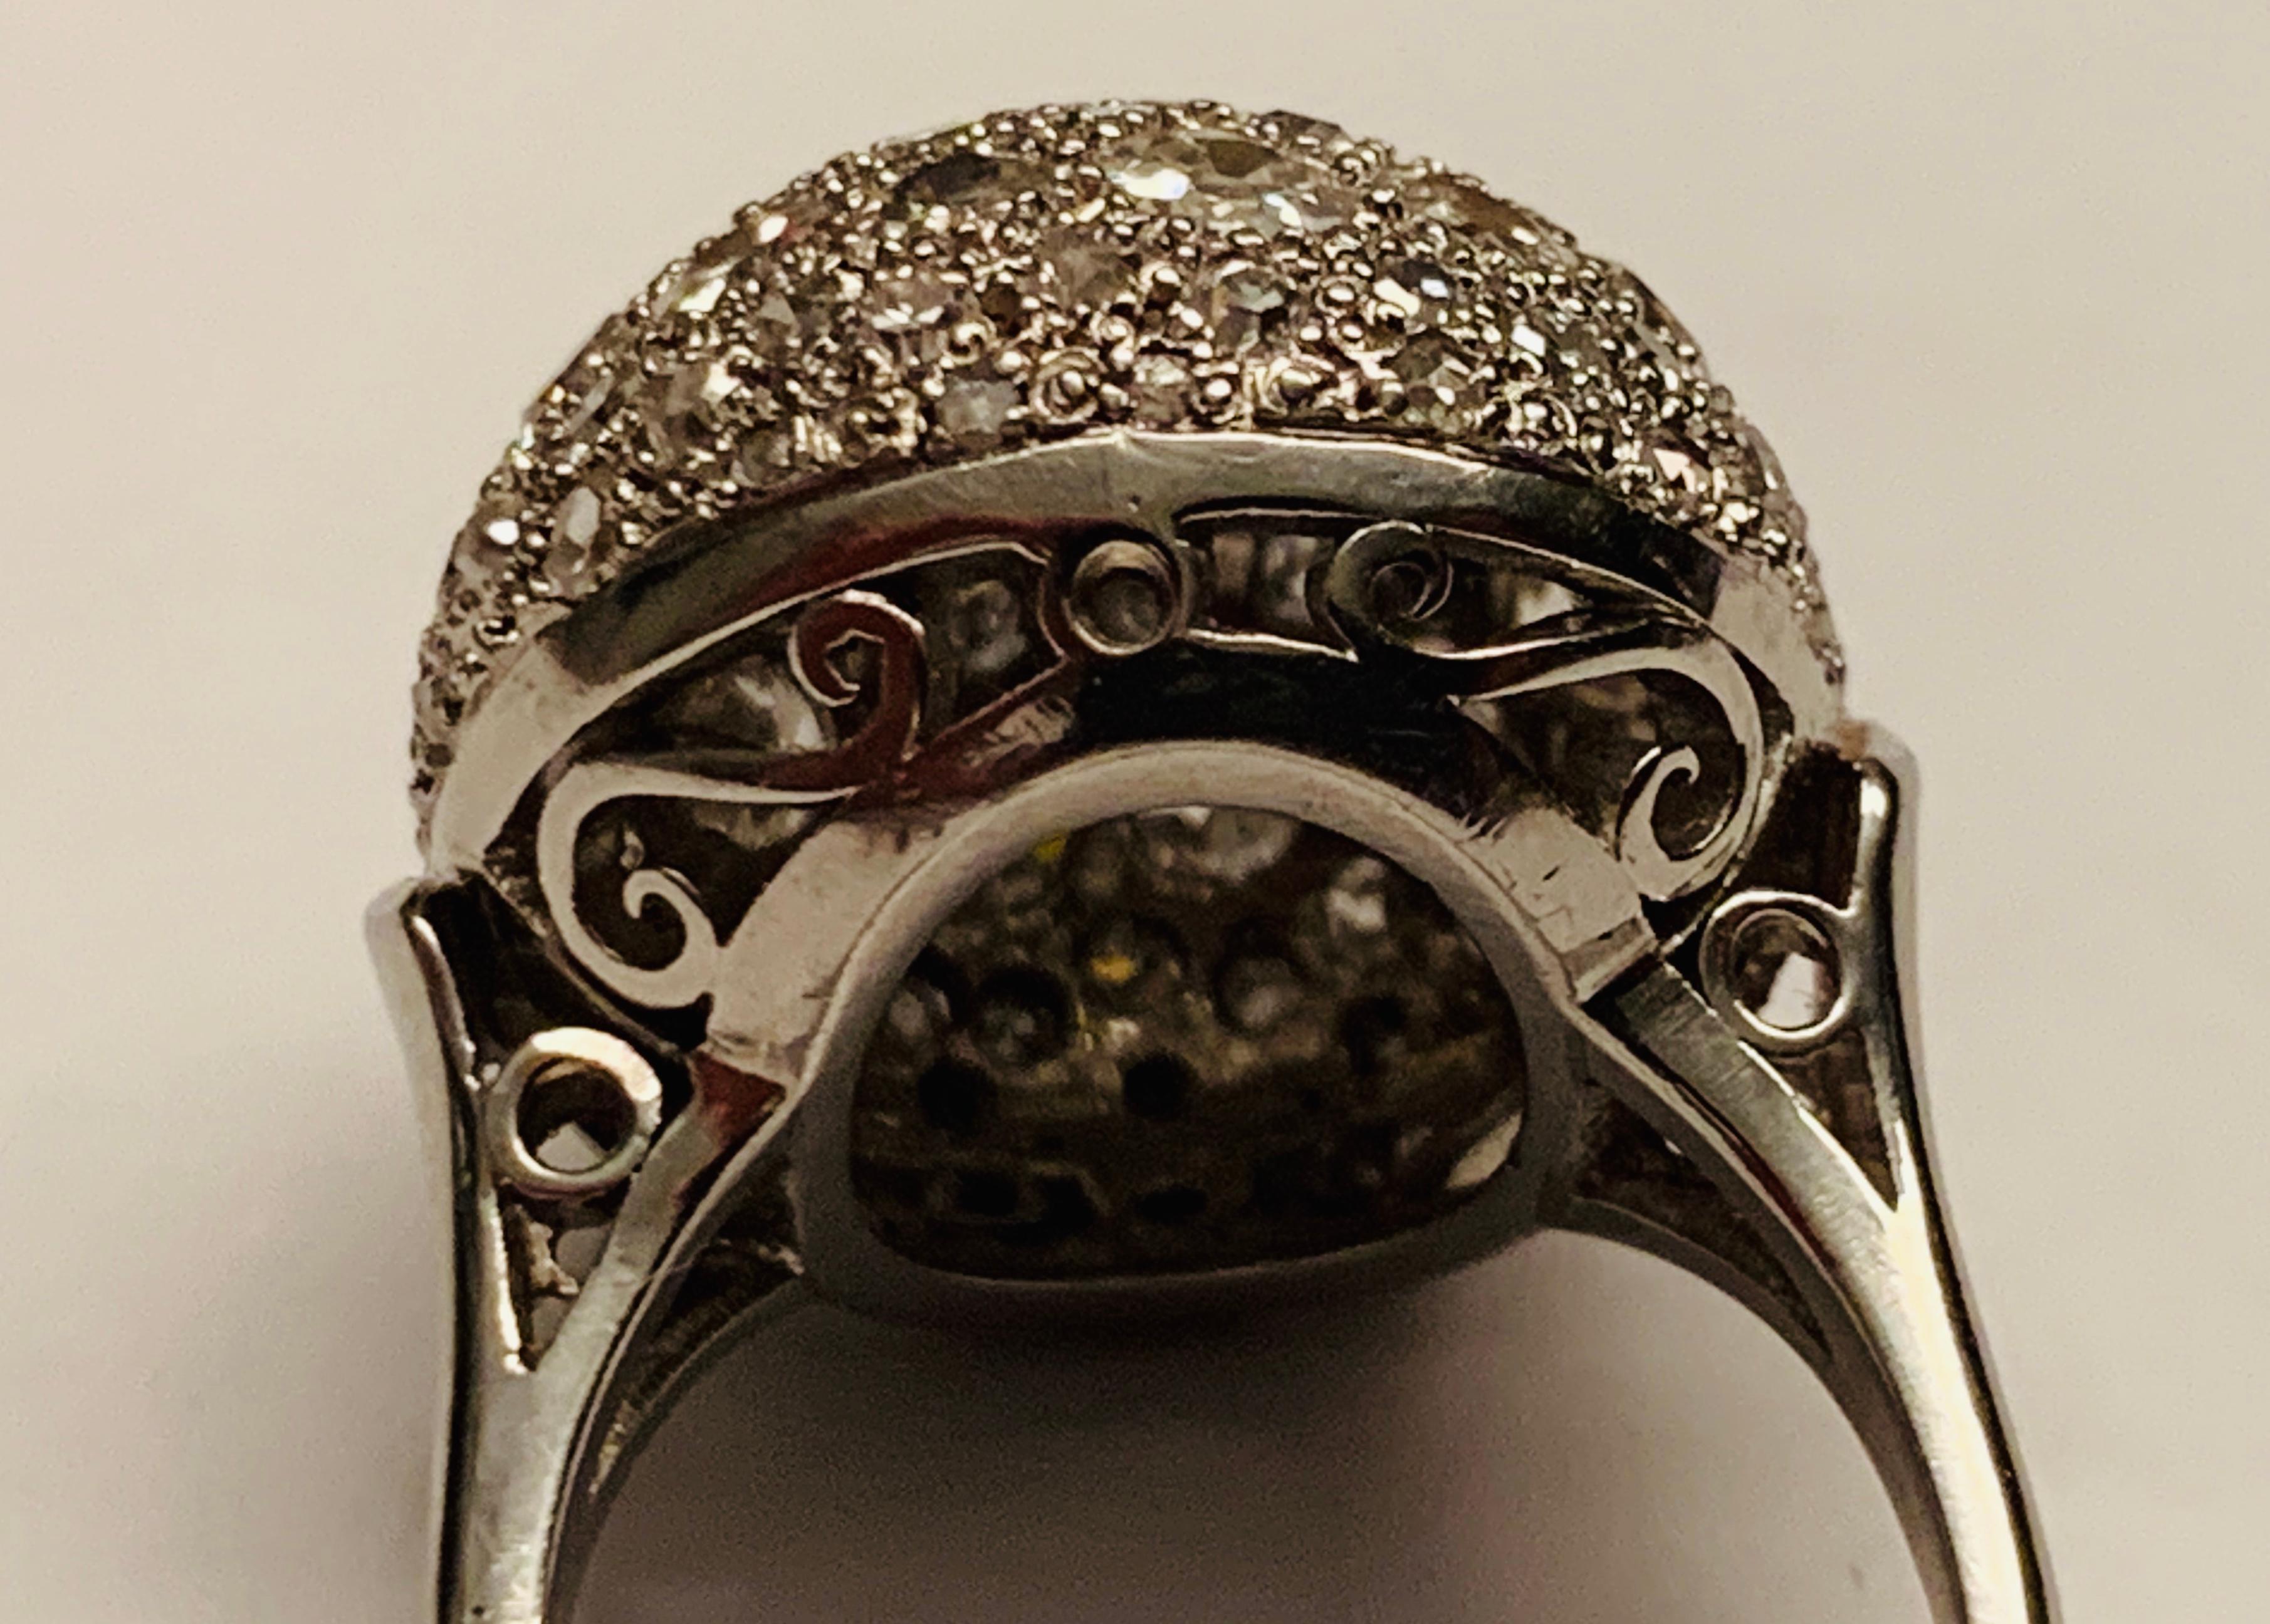 Unique Ring in Platinum and Iridium, featuring a globe shaped motive wich is pavé set with 90 old cut Diamonds with an approximate weight of 2.70 ct. 
The ring is currently size 52/12 but can be resized larger or smaller if necessary.